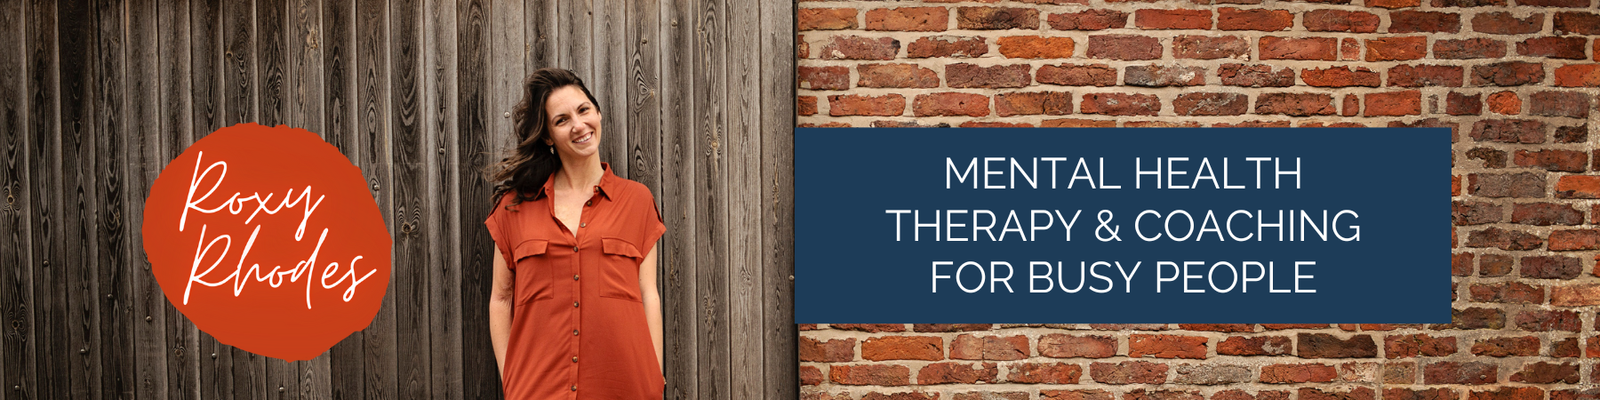 Image of Roxy Rhodes in an orange dress against a brick wall. Image has a Roxy Rhodes in white text in an orange circle, with a blue box with white text reading Mental Health Therapy and Coaching for Busy People